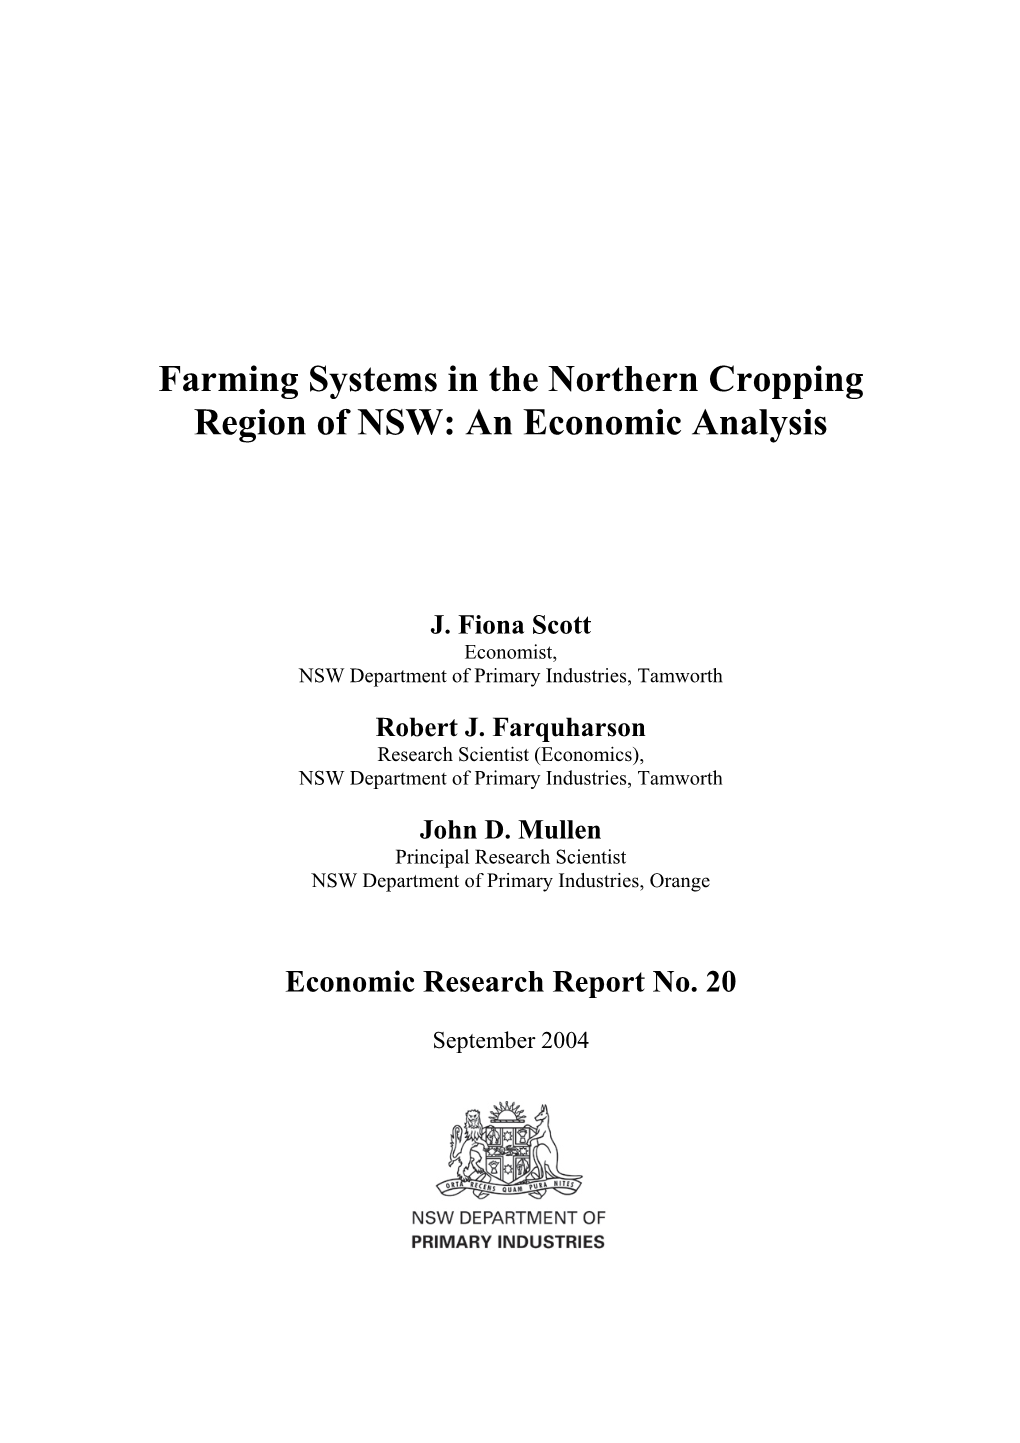 Farming Systems in the Northern Cropping Region of NSW: an Economic Analysis